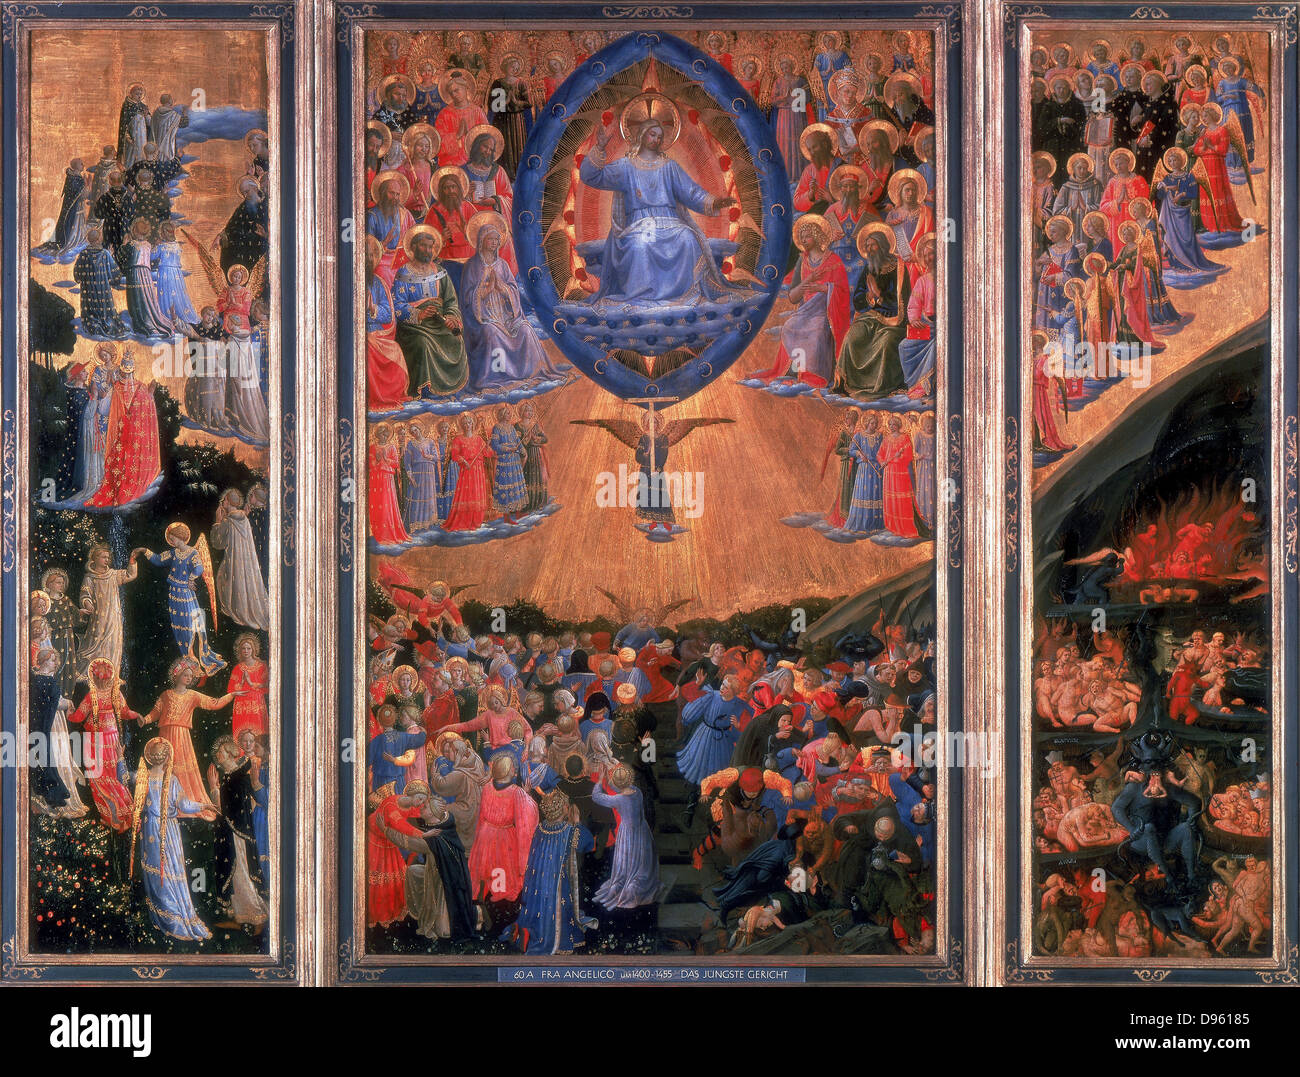 The Last Judgement'. Heaven, left, Hell, right. Christ sits in judgement in central panel. Fra Angelico (1400-1455) Florentine painter. Triptych. Tempera on board. Staatliche Museum, Berlin. Stock Photo